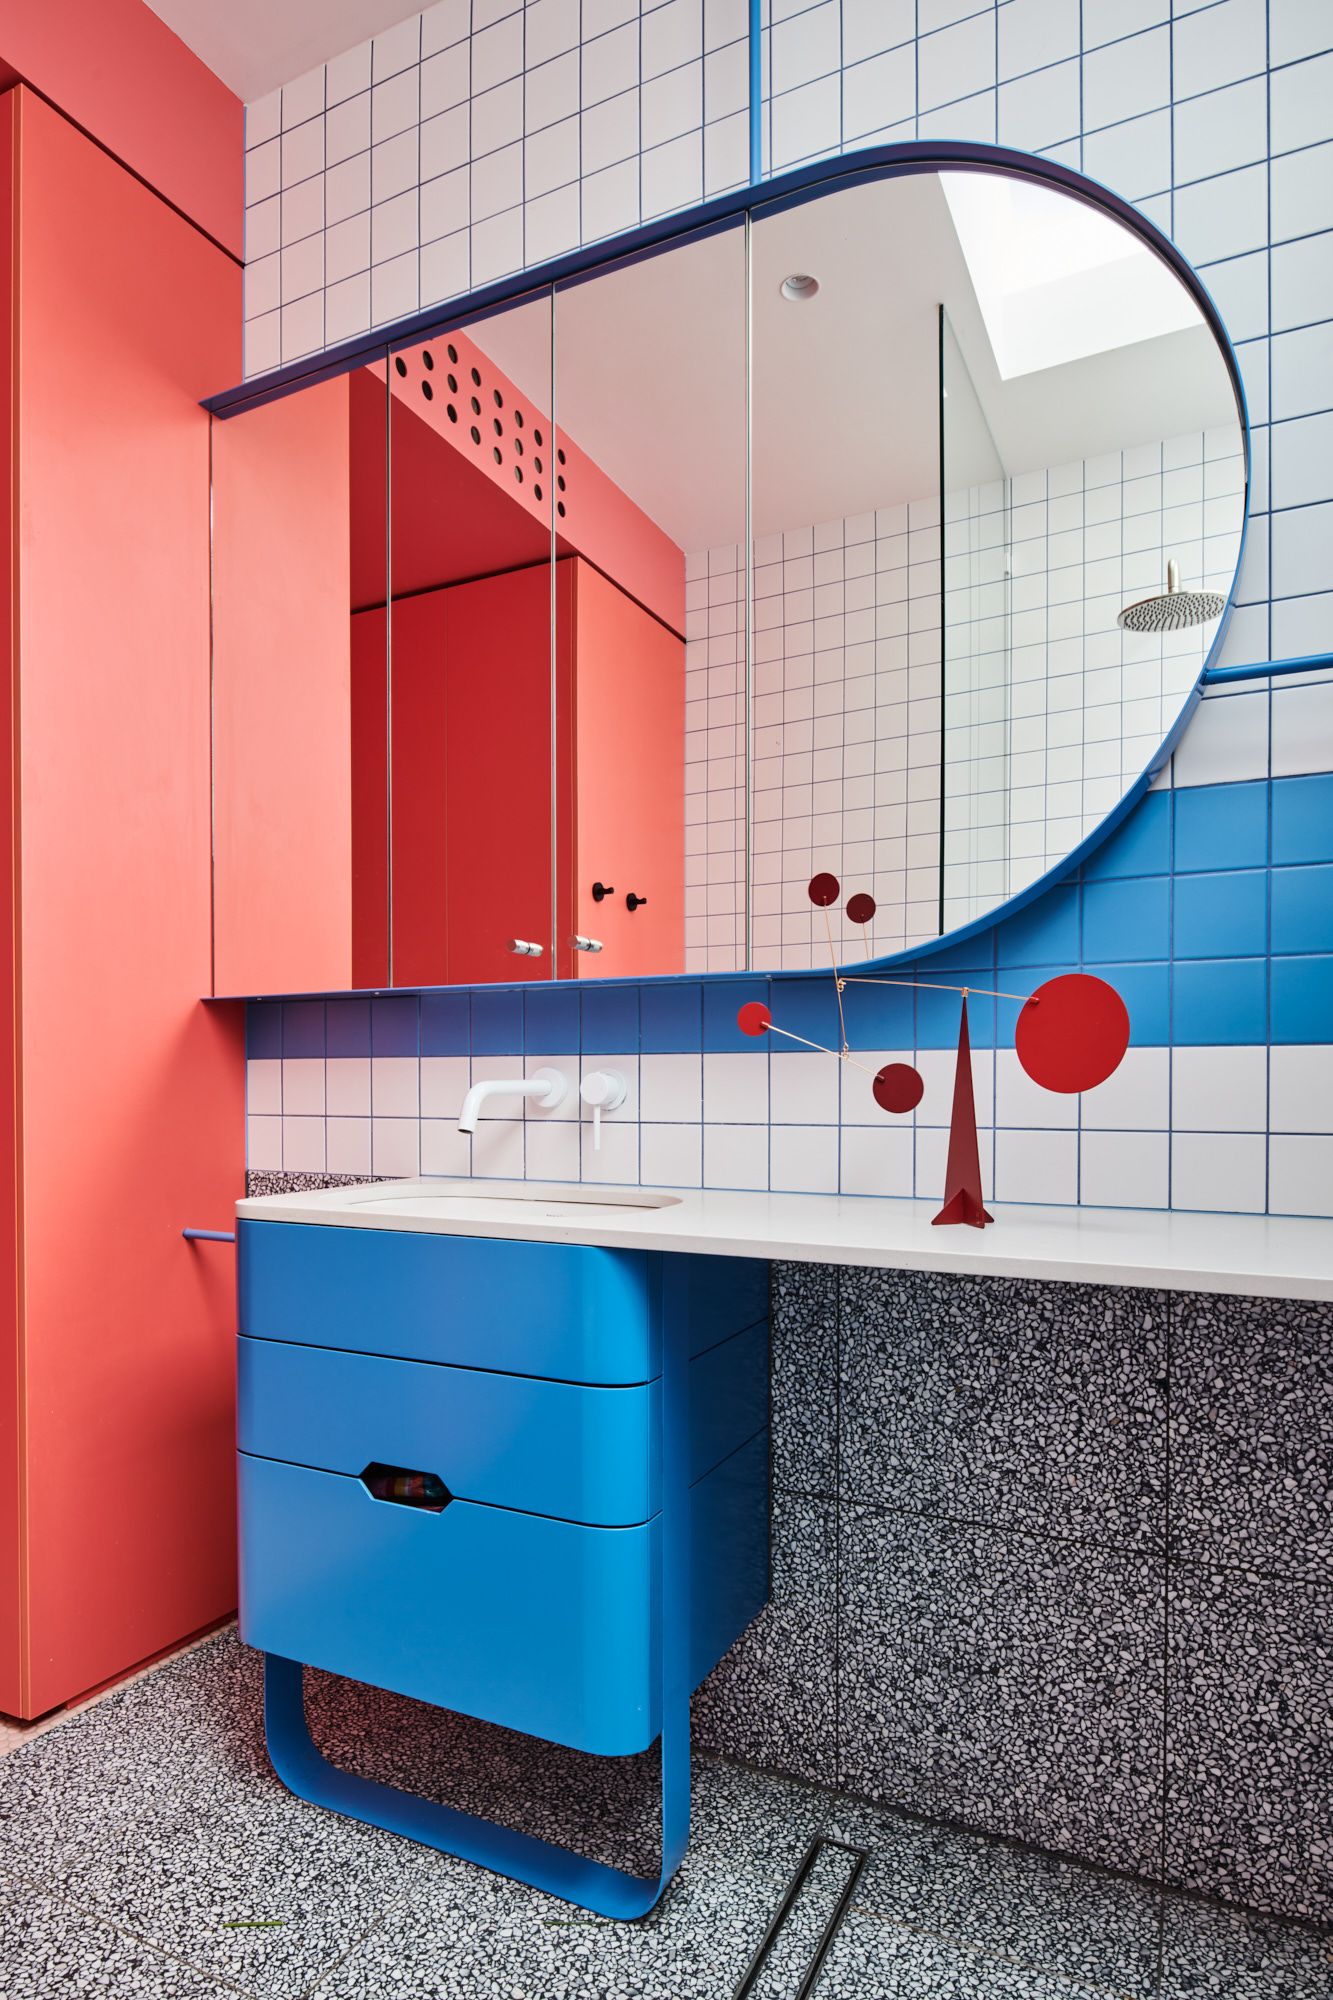 Hot Top Peak by FIGR Architecture. Bathroom viewing, featuring vibrant shades of blue and salmon. 